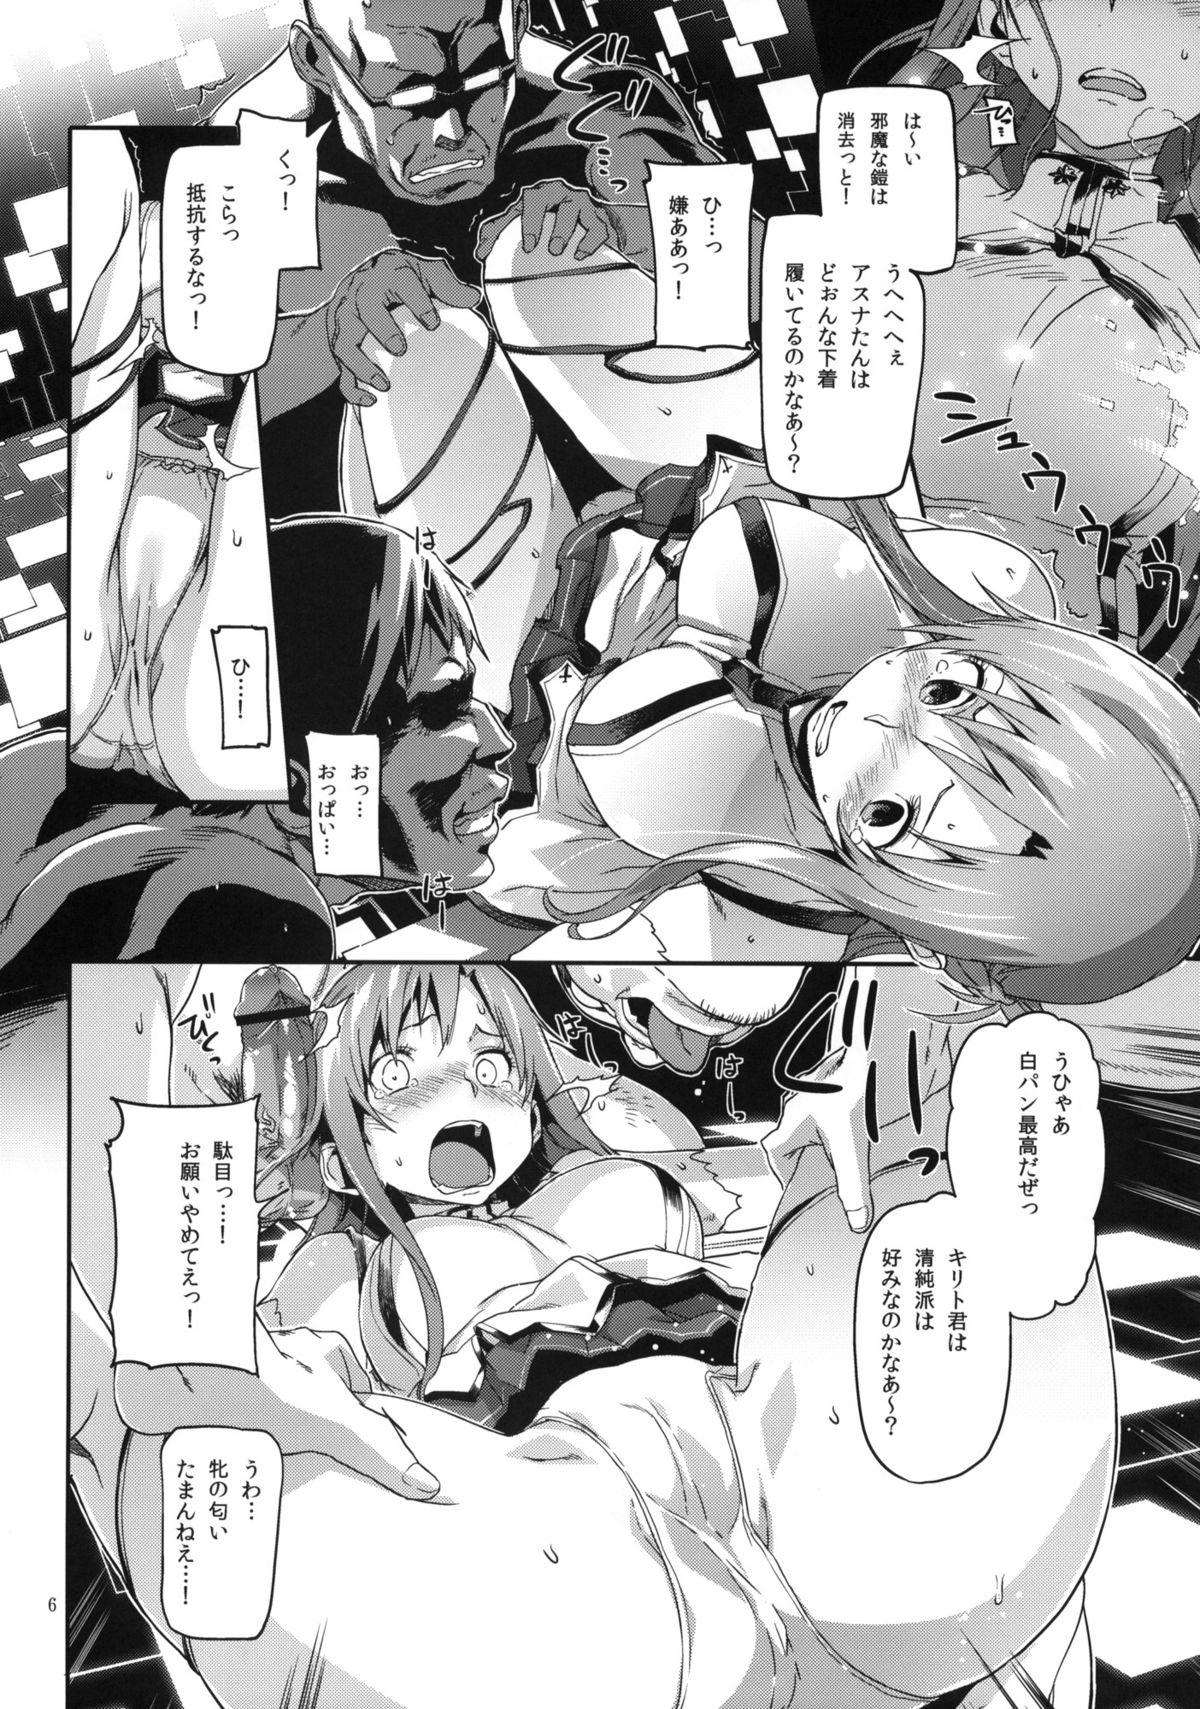 Passion DELETE - Sword art online Wife - Page 7